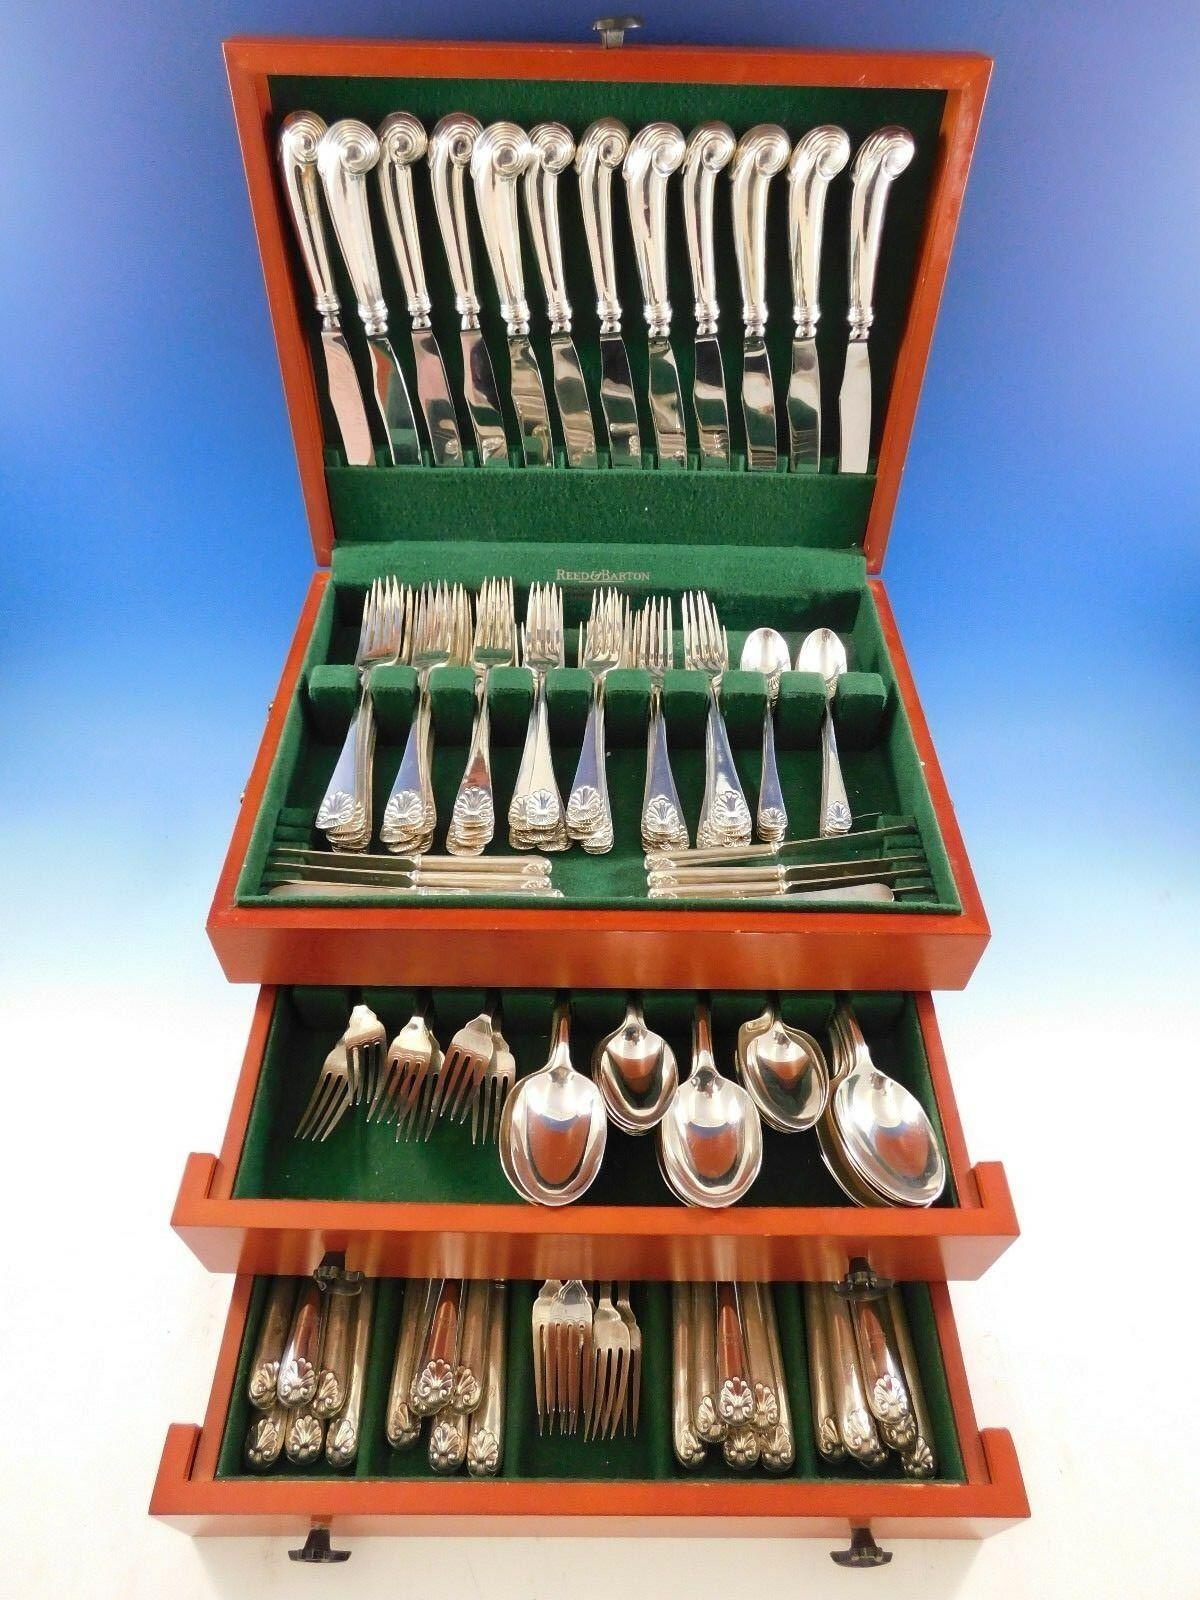 Monumental English Shell by Crichton Brothers of London sterling silver Flatware set, 148 pieces. This set includes:

12 dinner knives, 9 3/4